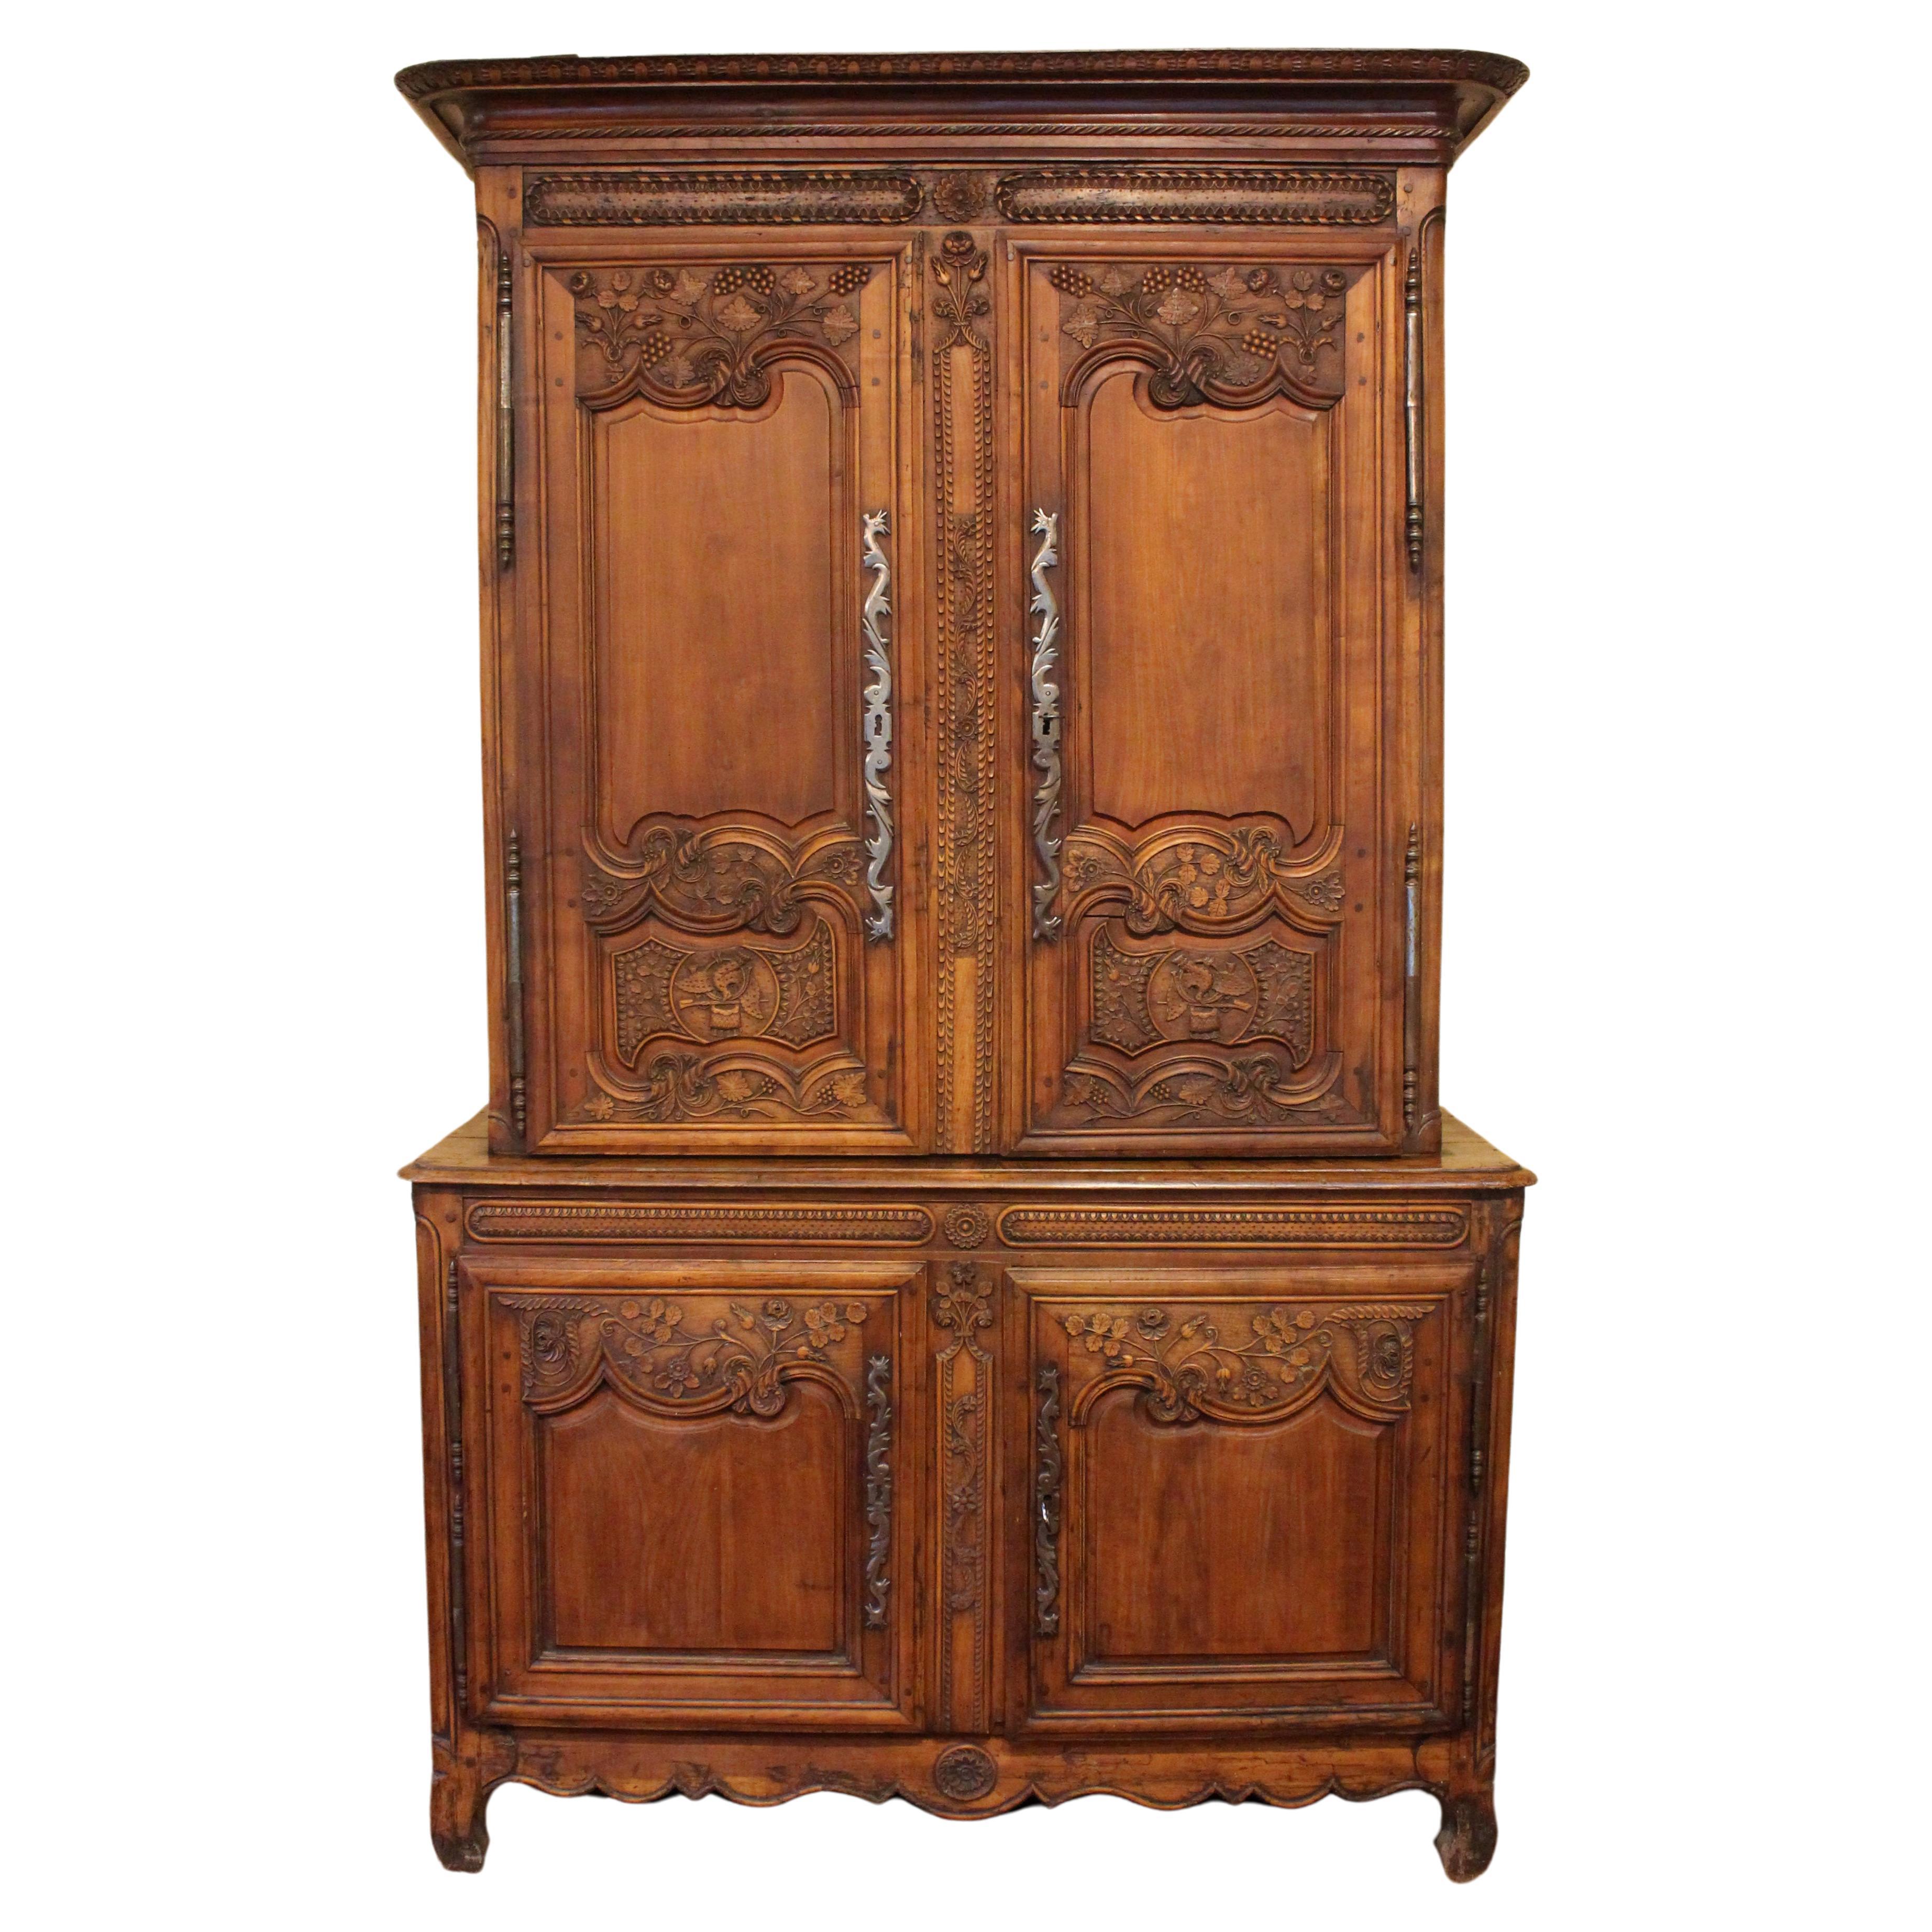 c. 1800 Country French Buffet à Deux Corps For Sale